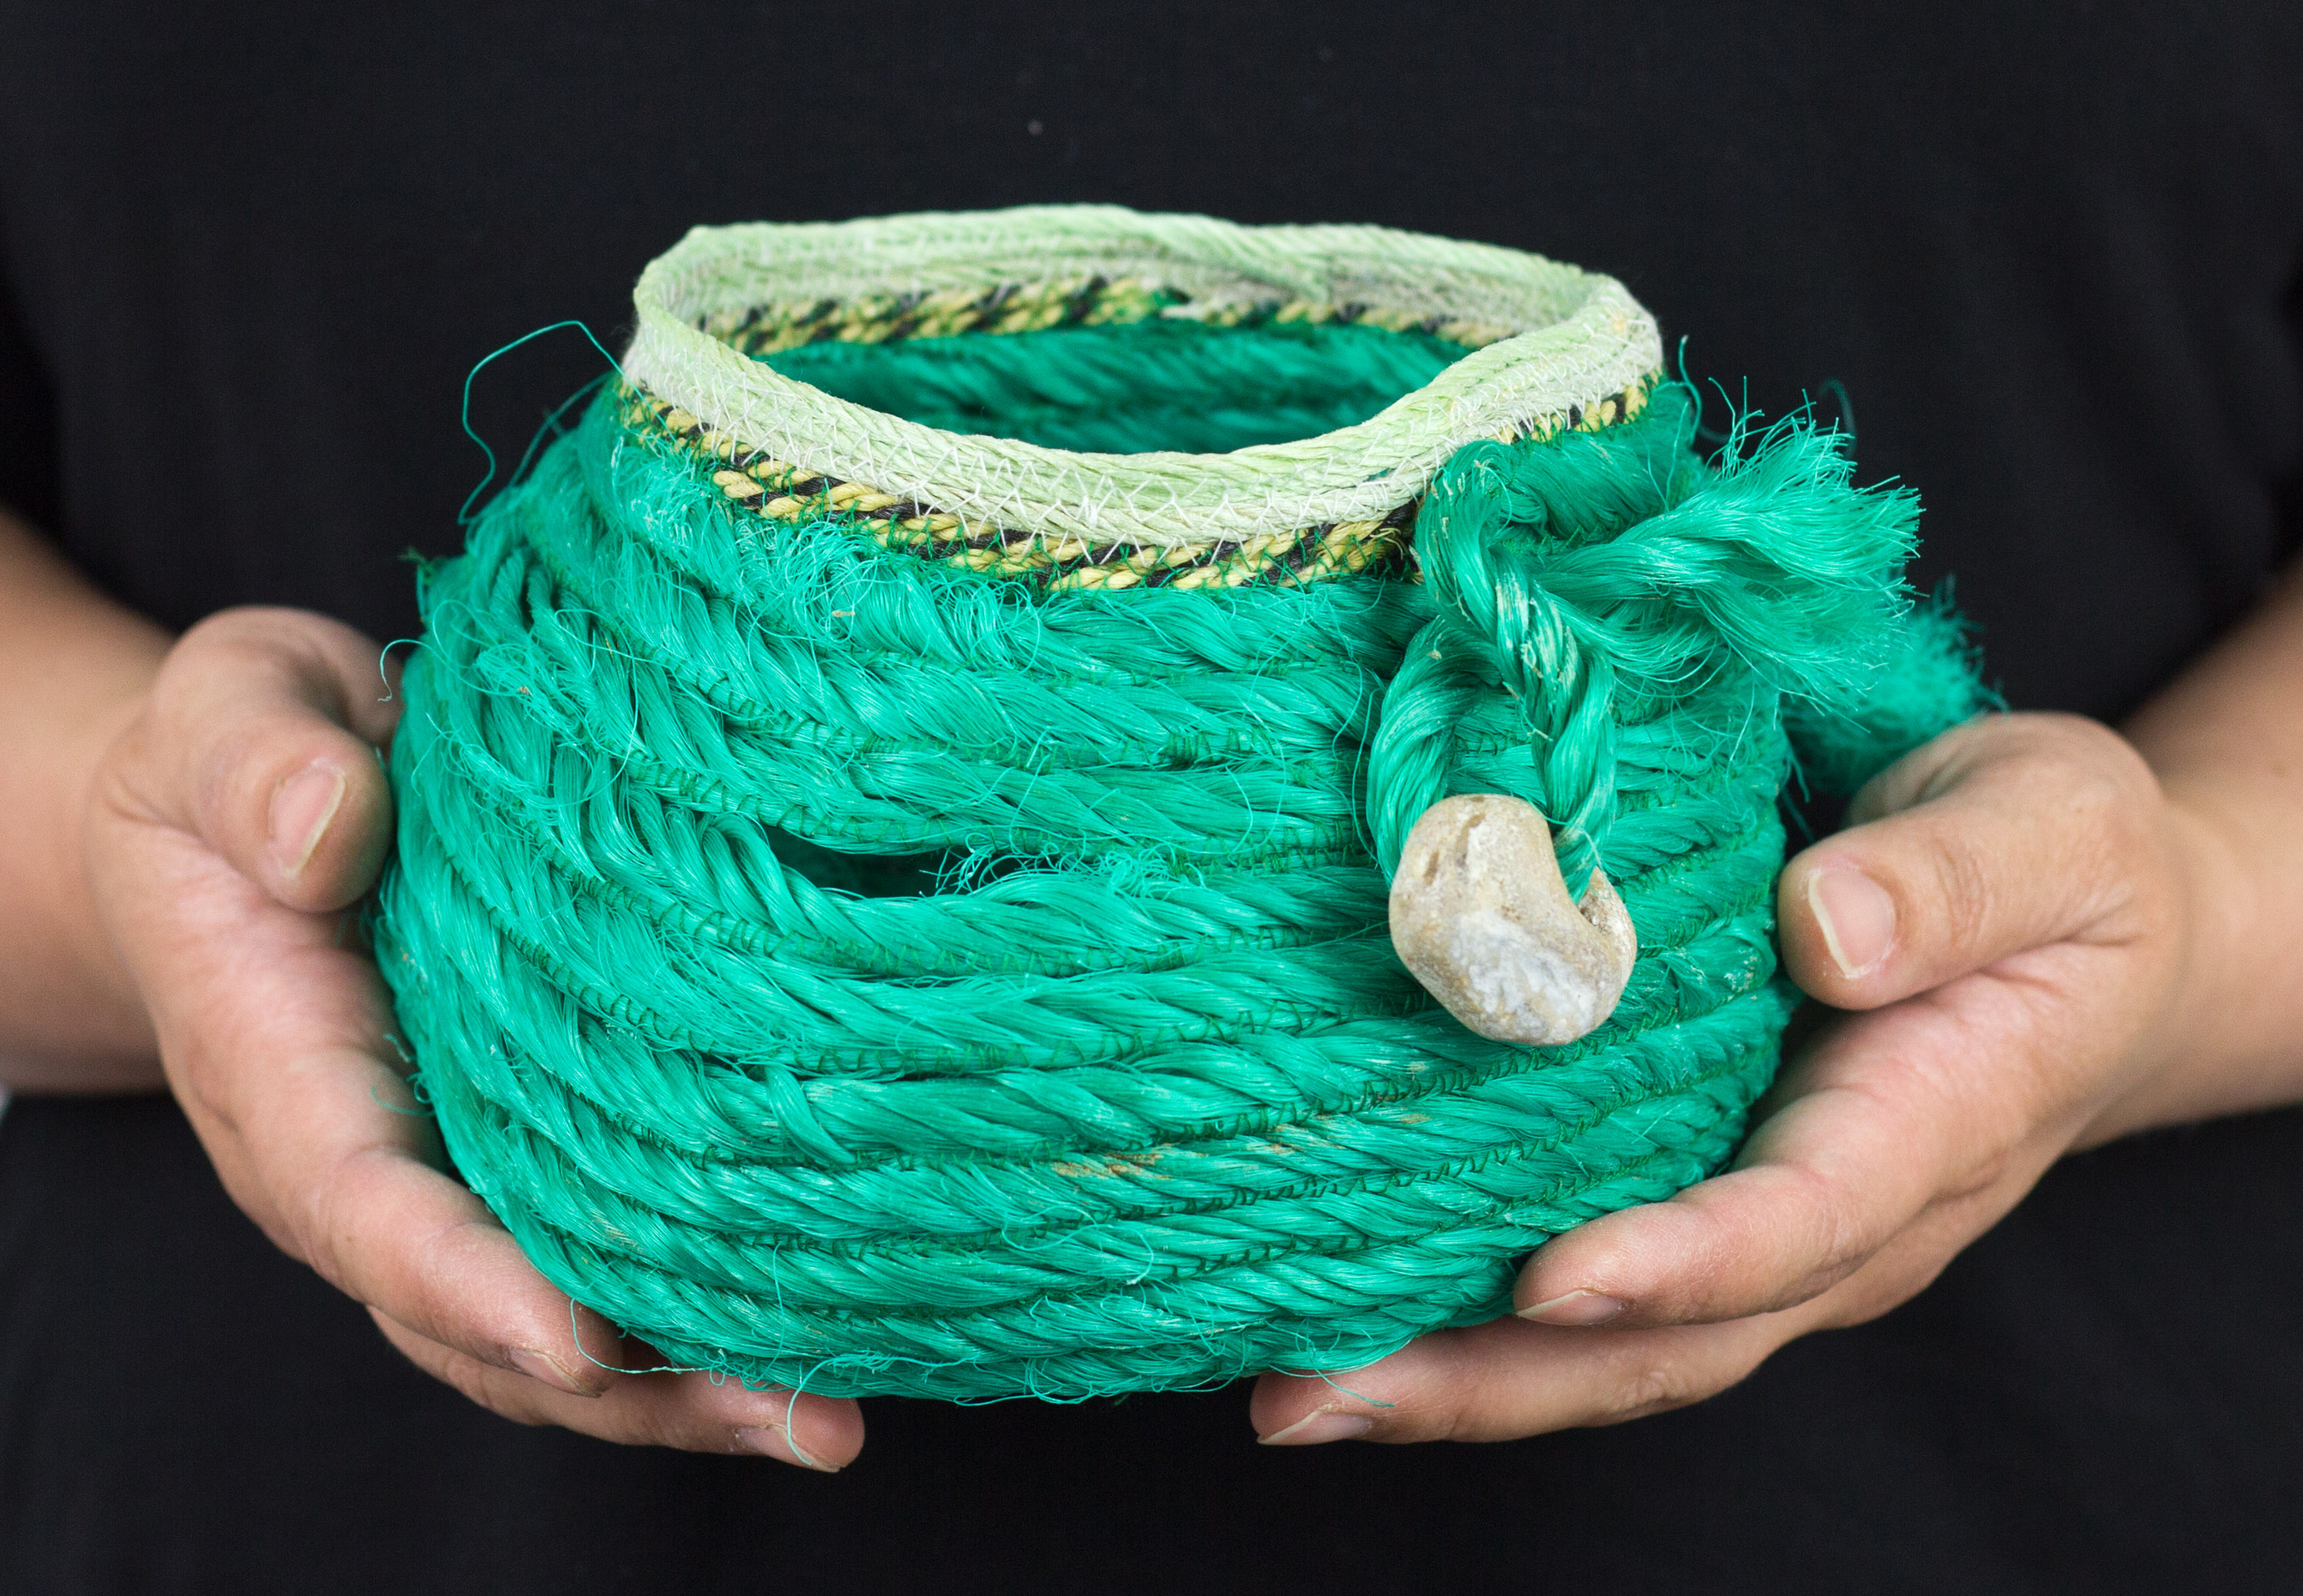 hands holding a basket made of crab rope, the rope is turquoise and black with a stone from the beach hanging from it.